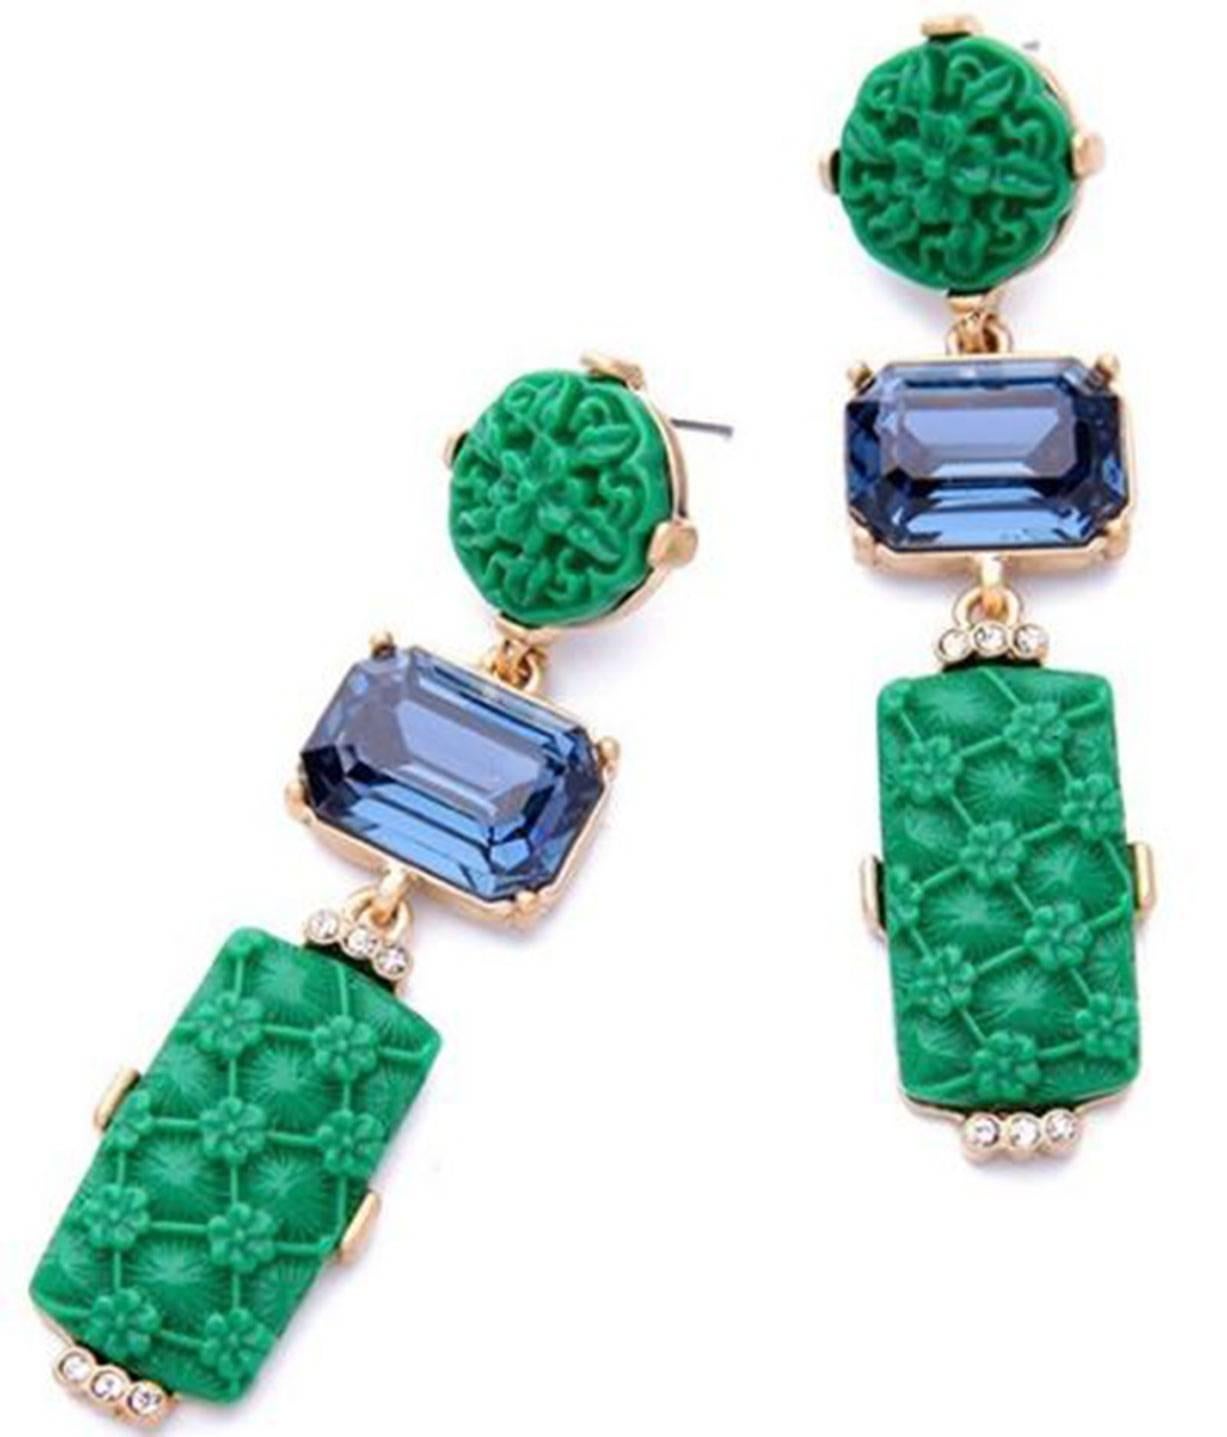 Beautiful Green and Blue Faux Gem Runway Earrings; Green molded Flower Resin and Faux Emerald cut Sapphires; Gold Tone Metal and Post for pierced ears. Striking Festive Show Stopper… Illuminating your Look with a touch of Class! 
